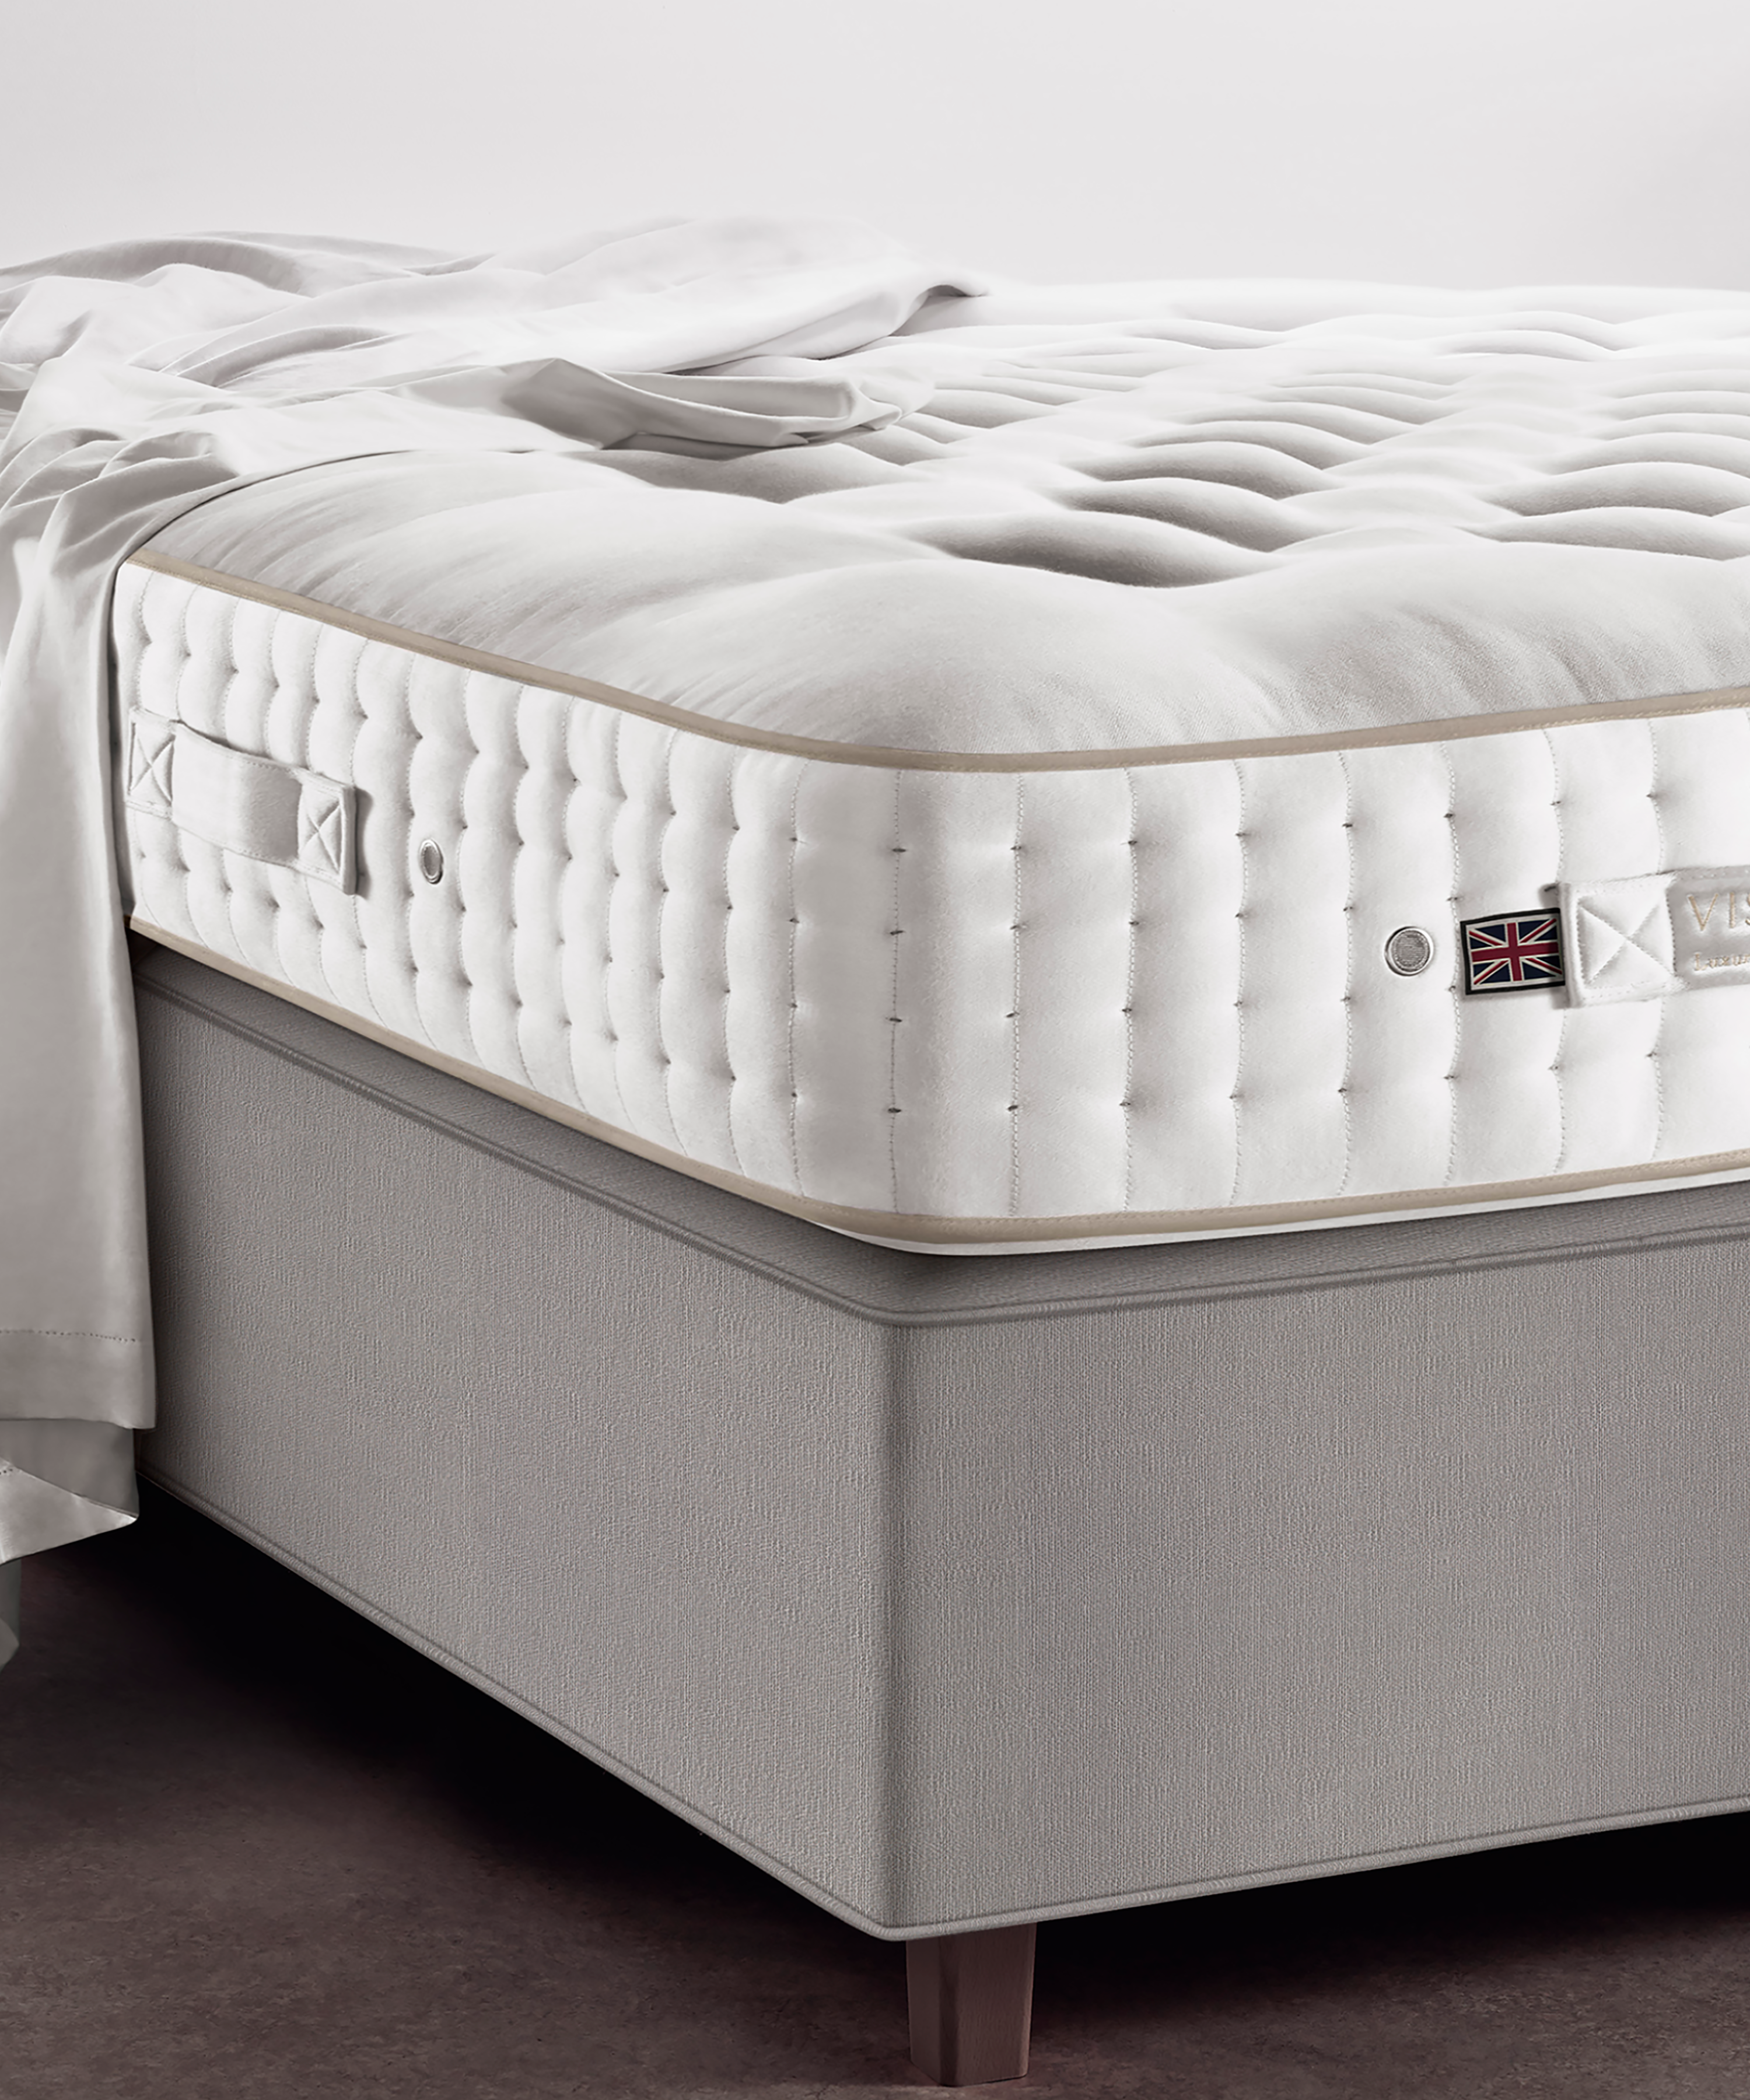 The Signatory has 3,300 coils hand-nested into two layers. Generous layers of cashmere, Shetland wool, British fleece wool, organic cotton, and Austrian Moosburger horsehair work to create a mattress of pure luxury. 